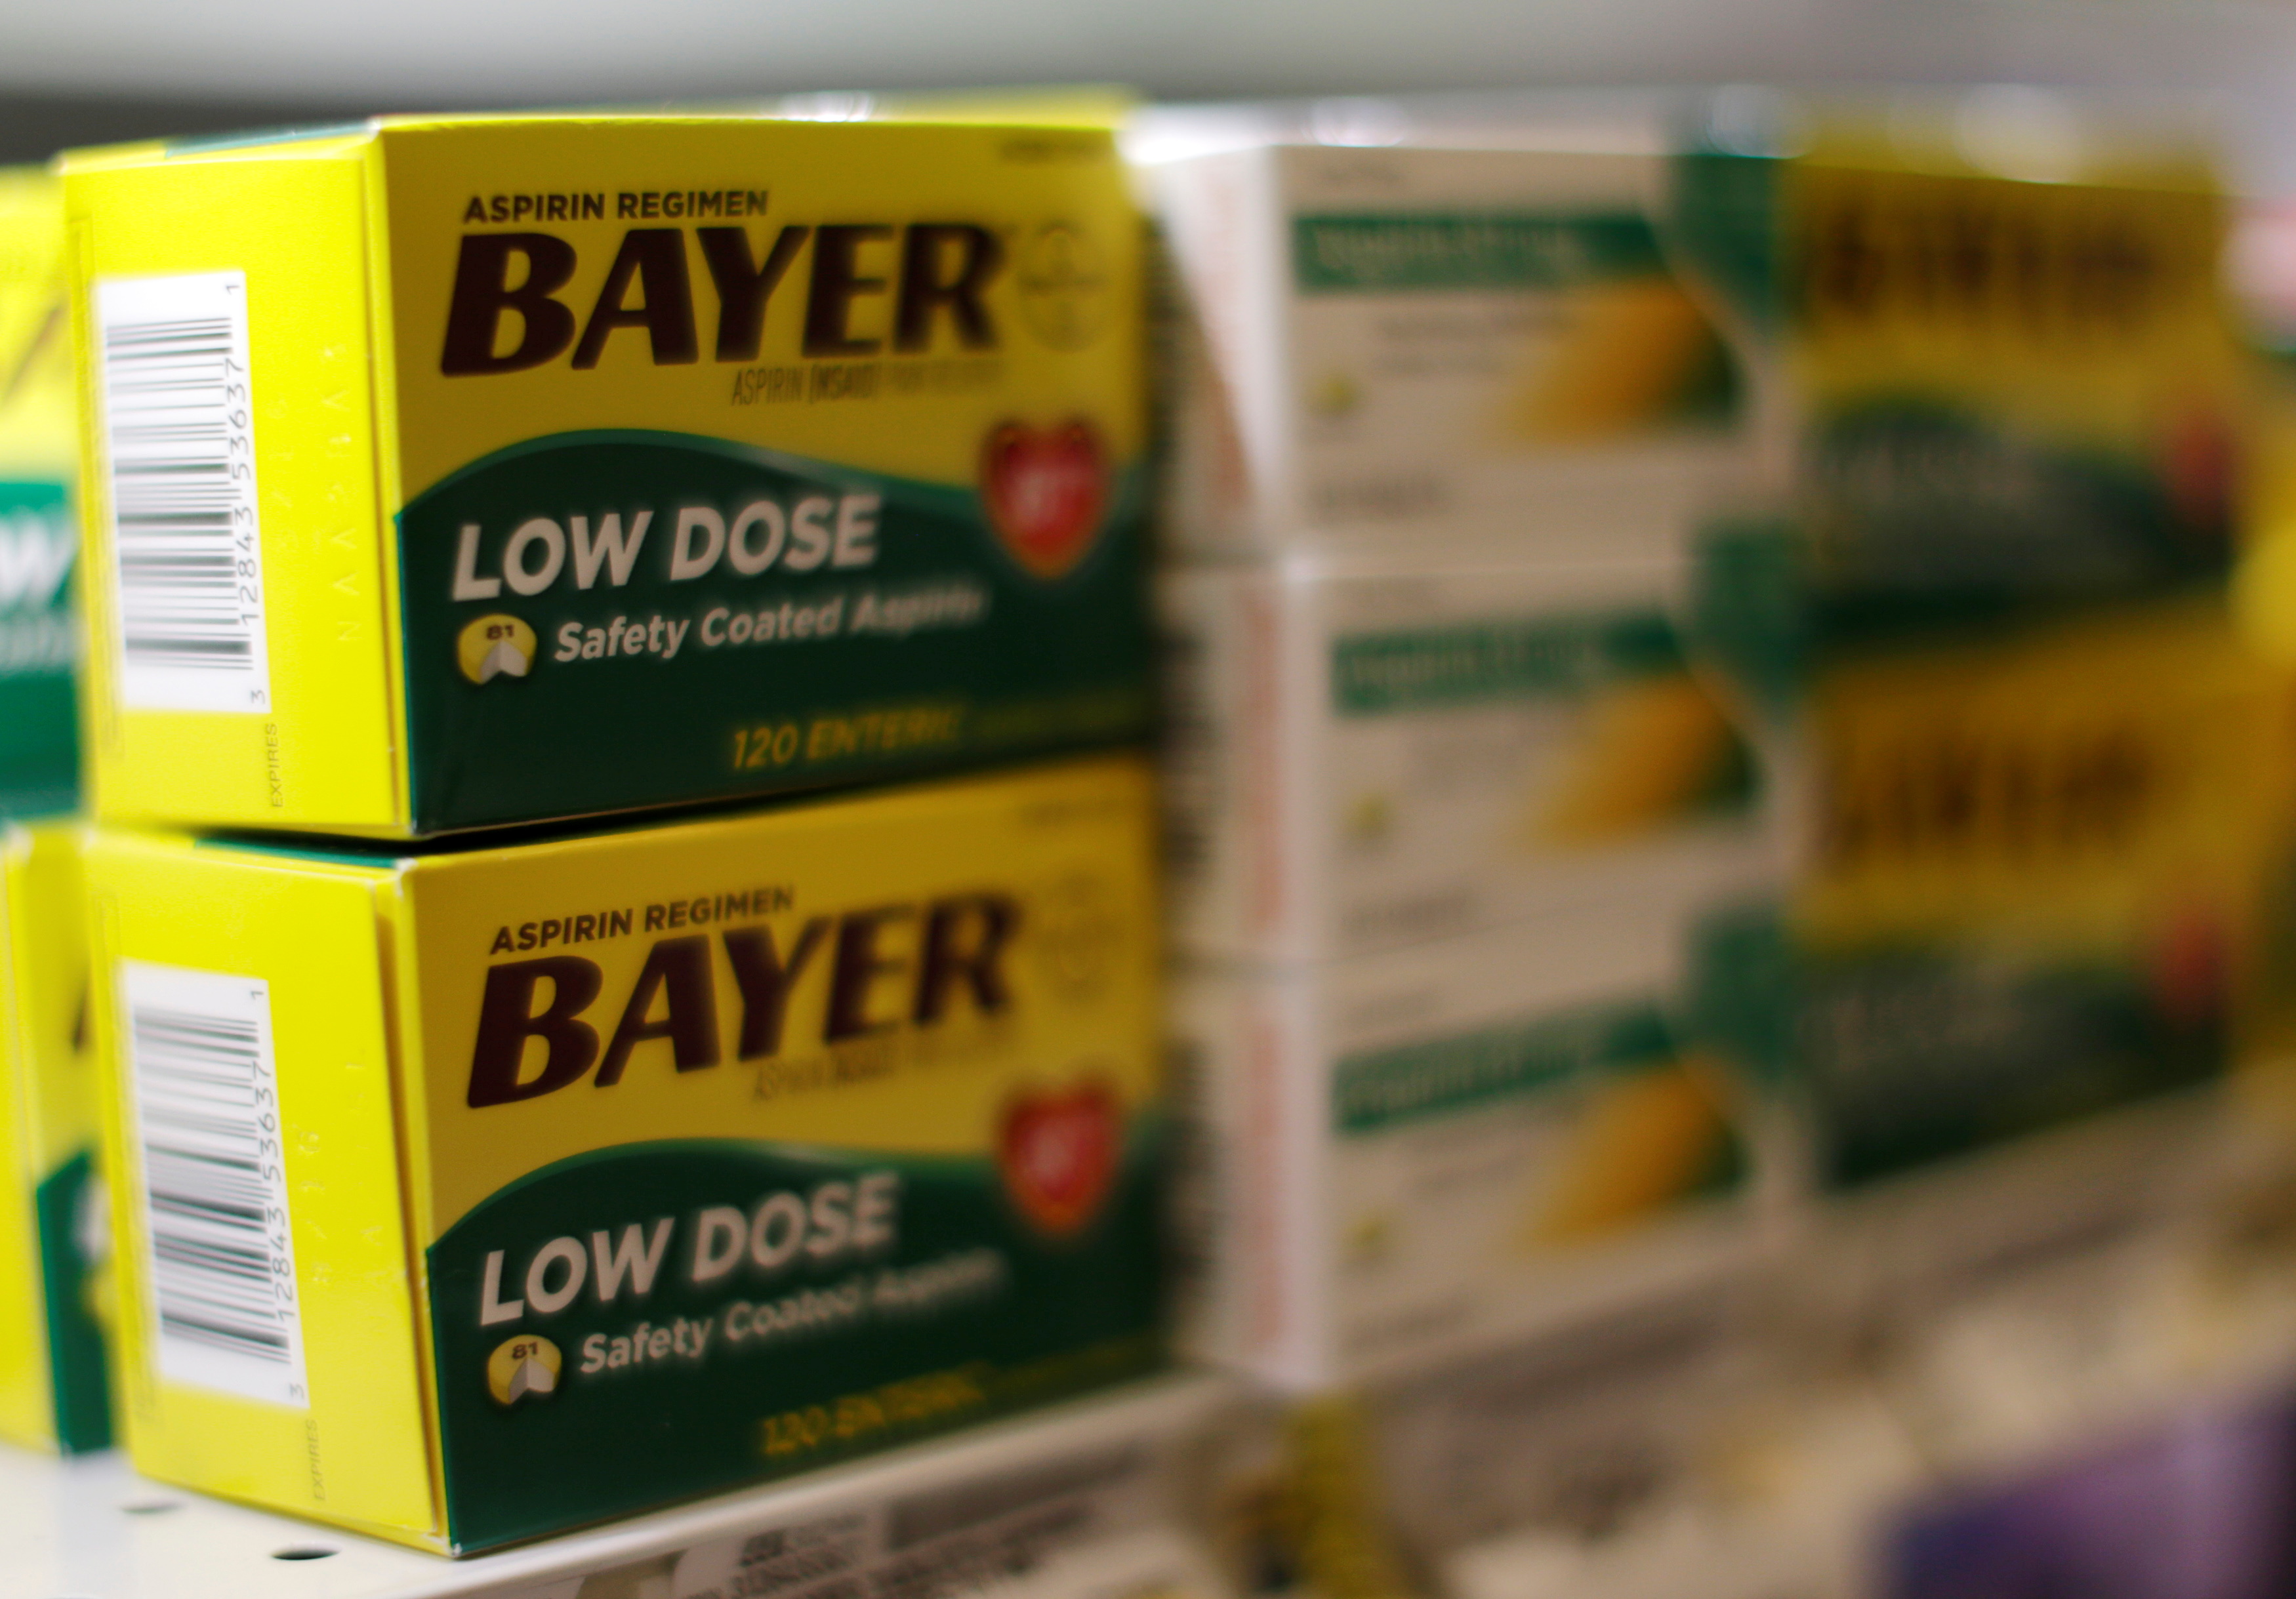 Bayer aspirin is seen at the Safeway store in Wheaton Maryland